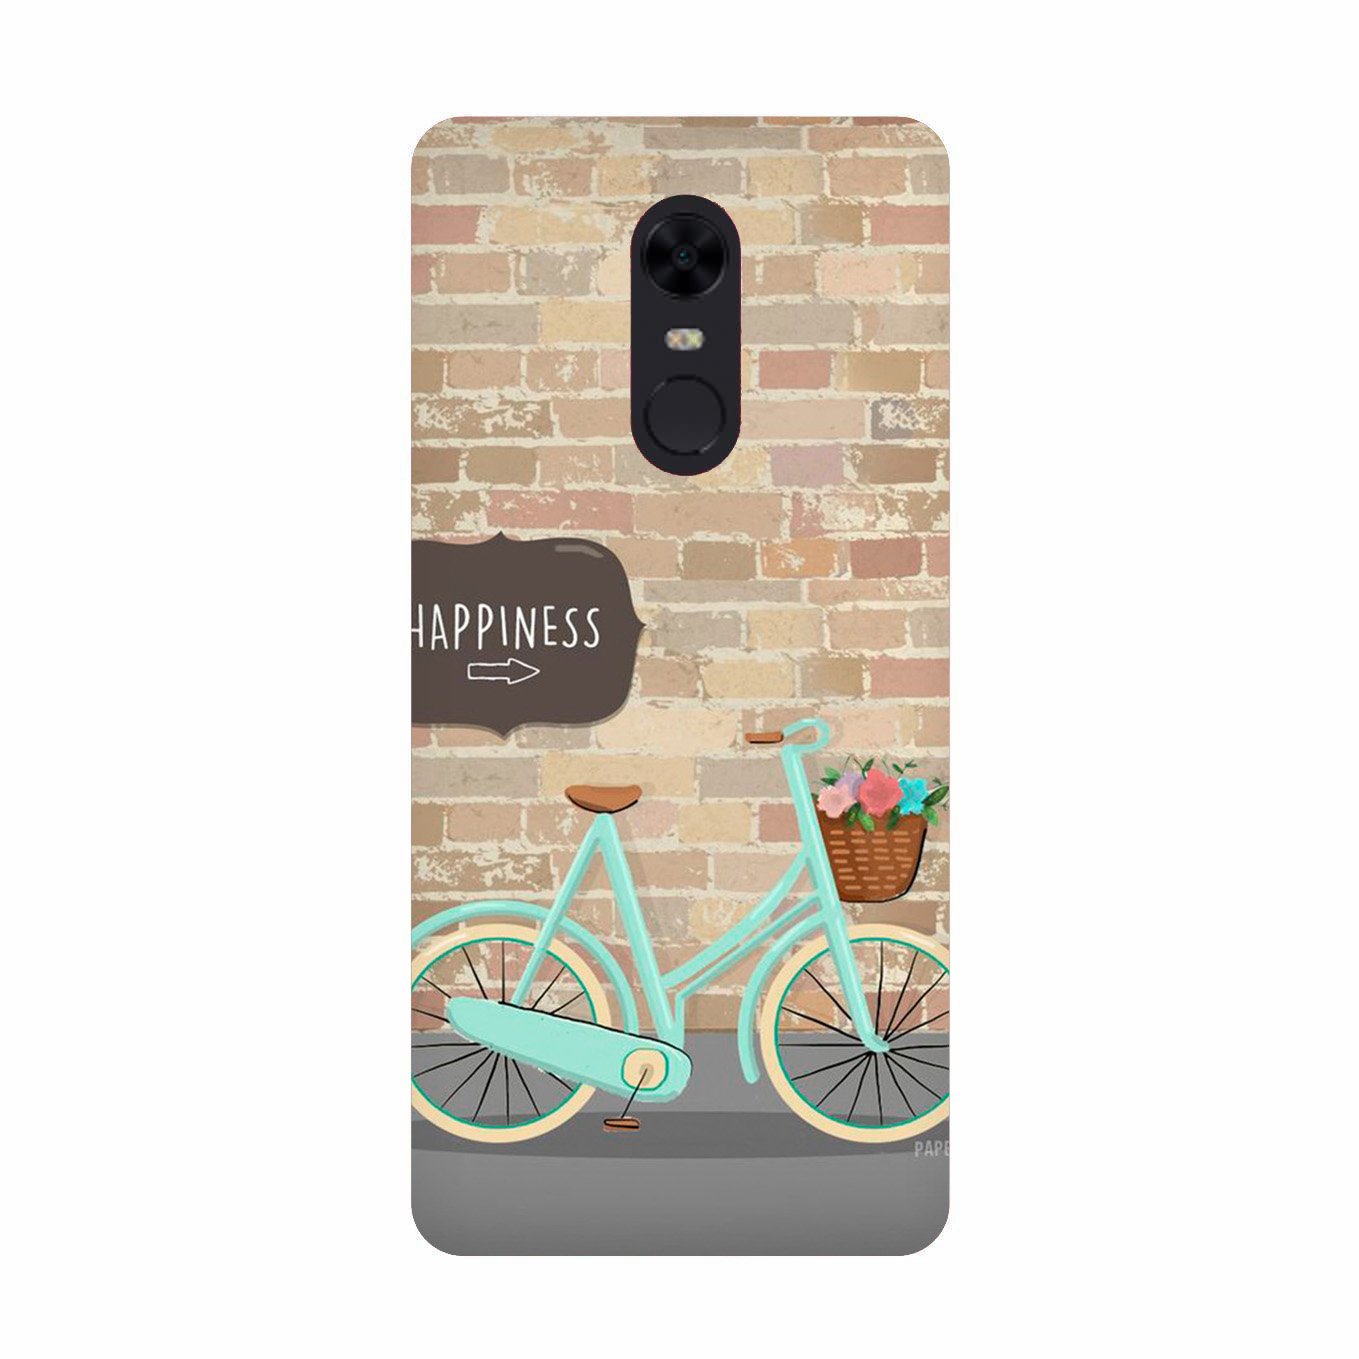 Happiness Case for Redmi Note 5